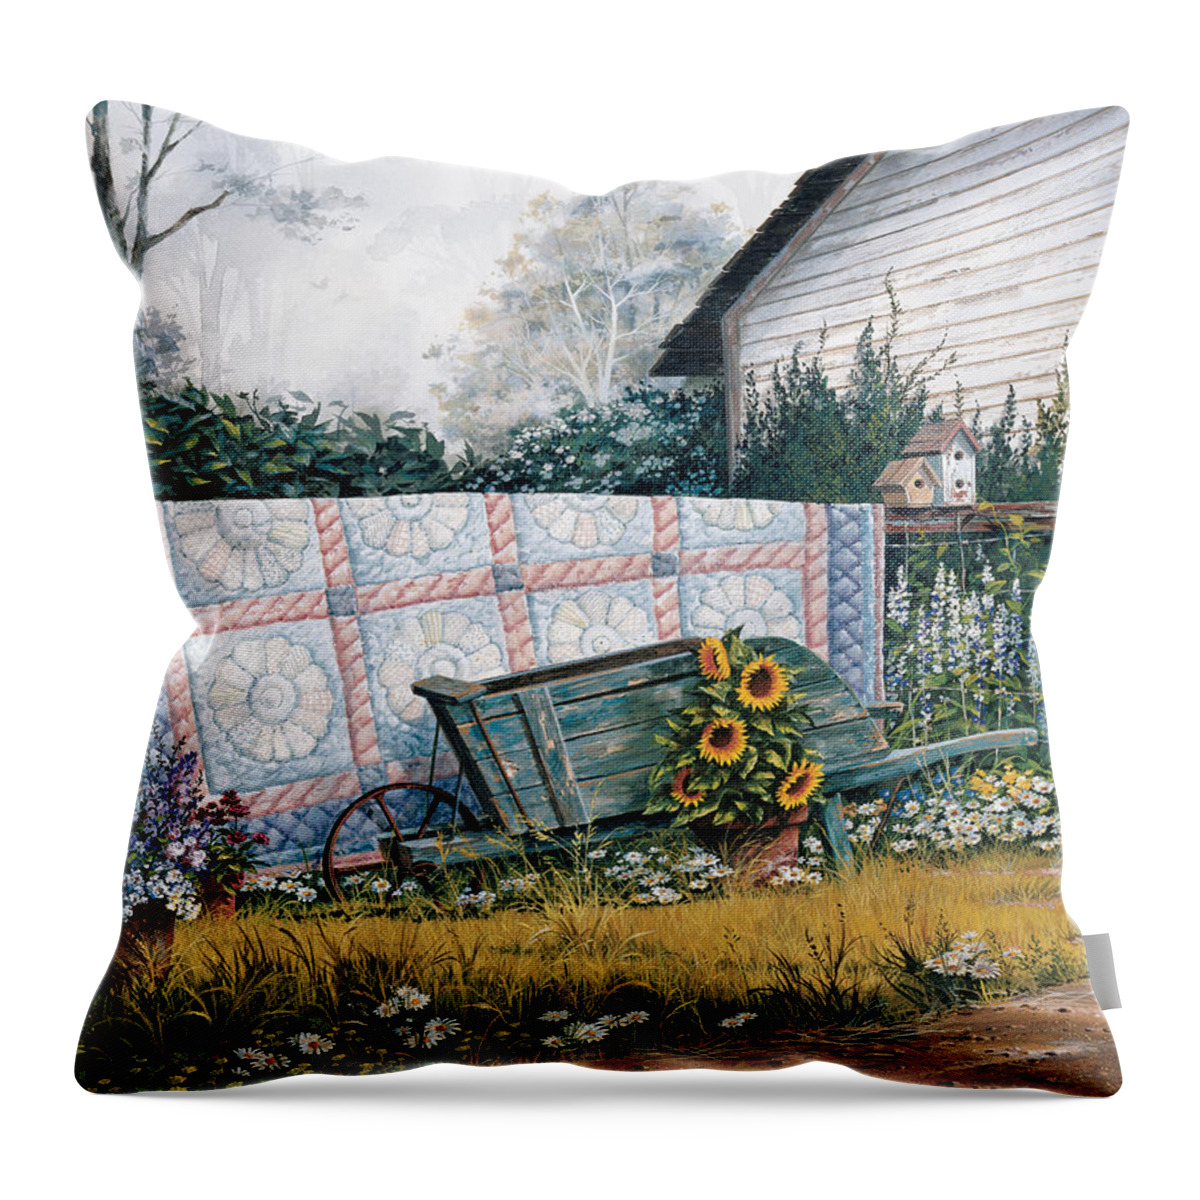 Michael Humphries Throw Pillow featuring the painting The Old Quilt by Michael Humphries